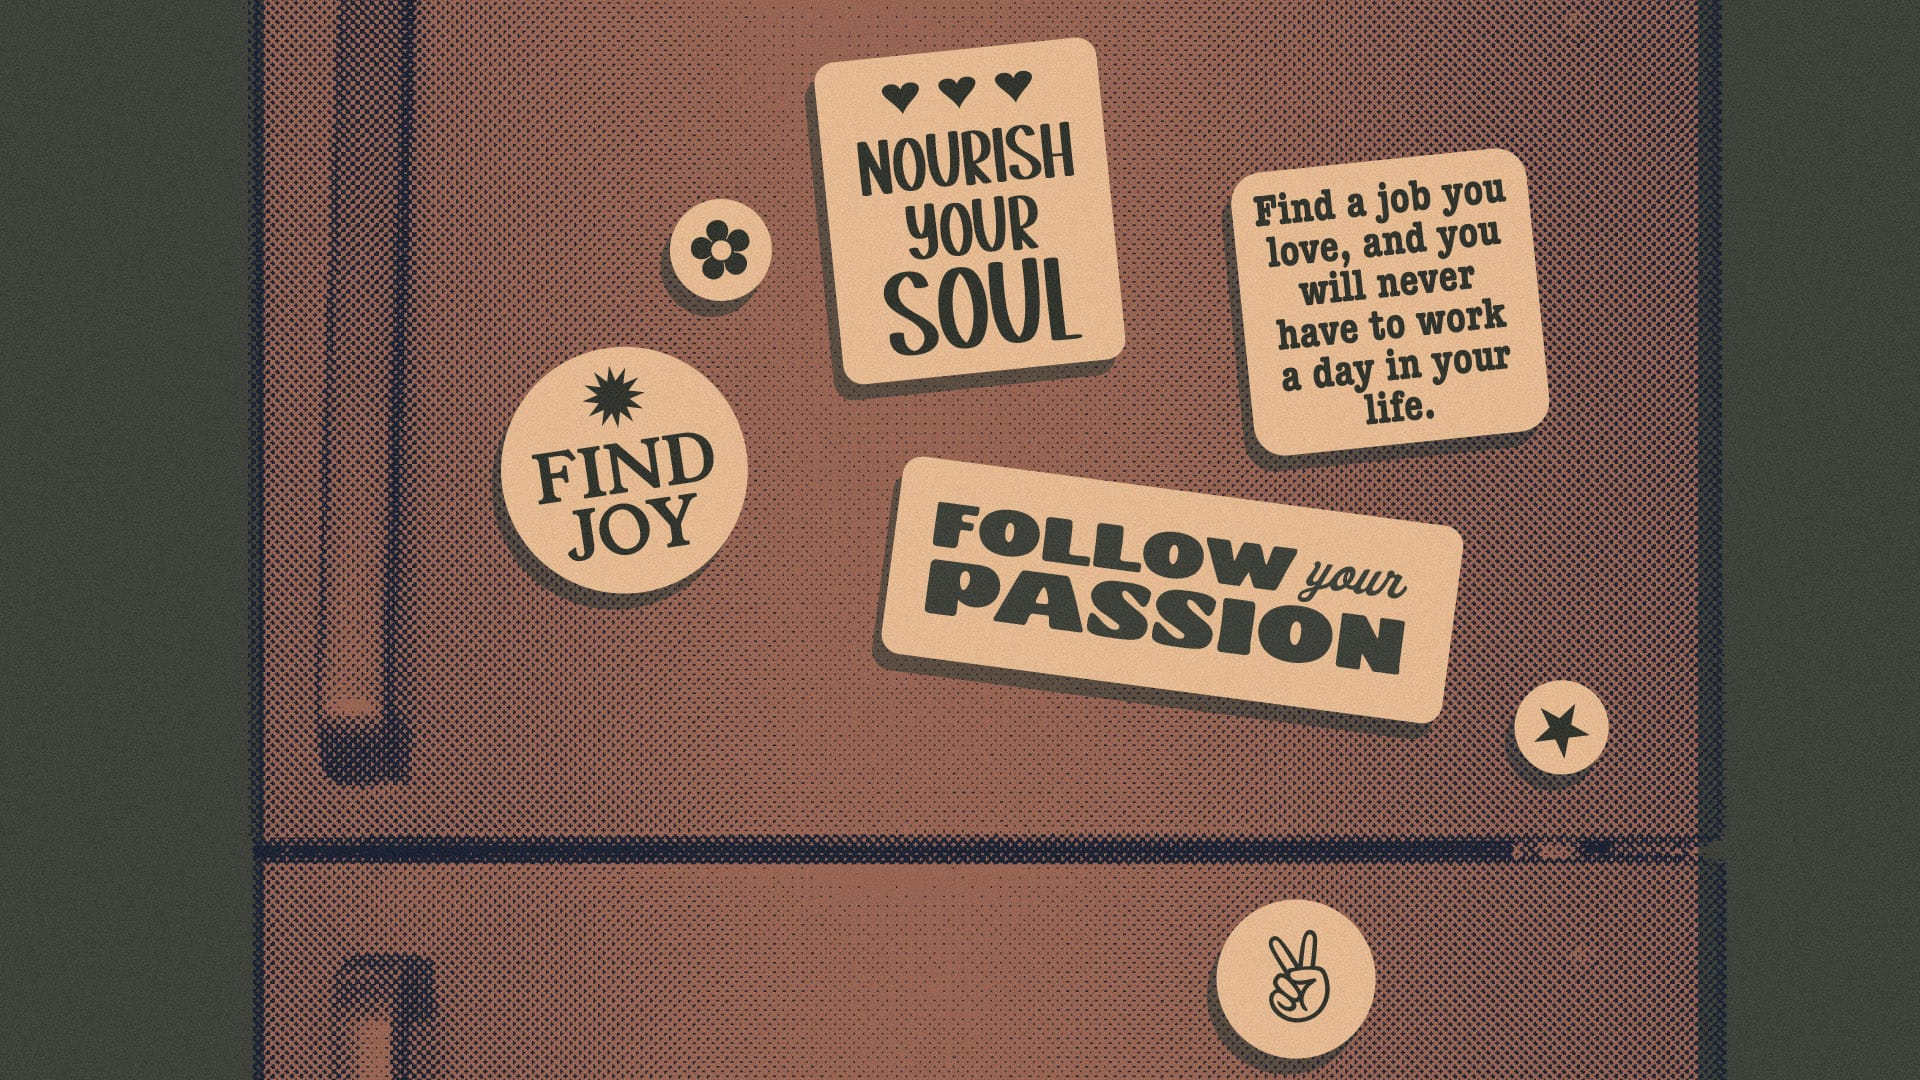 a refrigerator bearing inspirational magnets including a peace sign, "Find Joy," "Follow your Passion," and "Find a job you love, and you will never have to work a day in your life."